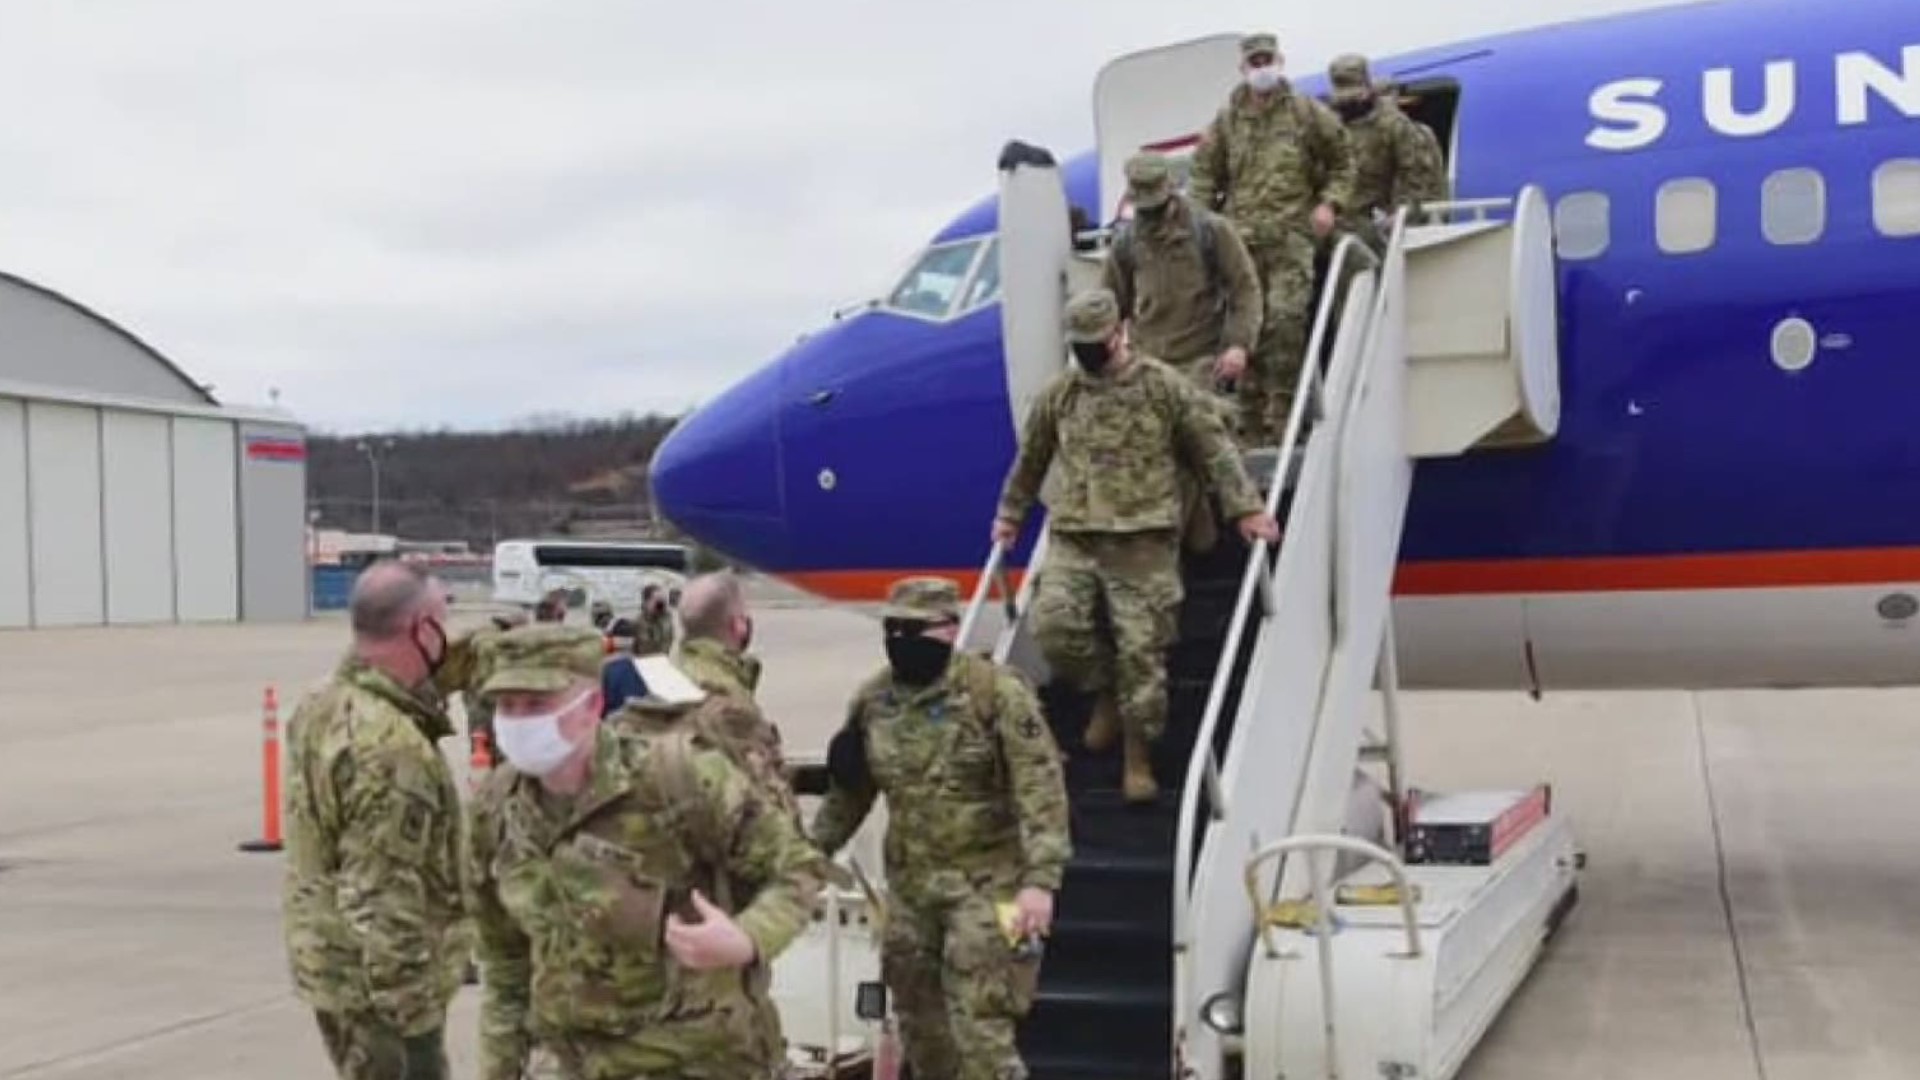 National Guardsmen are expected to return to Fort Smith from their inauguration security mission in Washington D.C. this weekend.